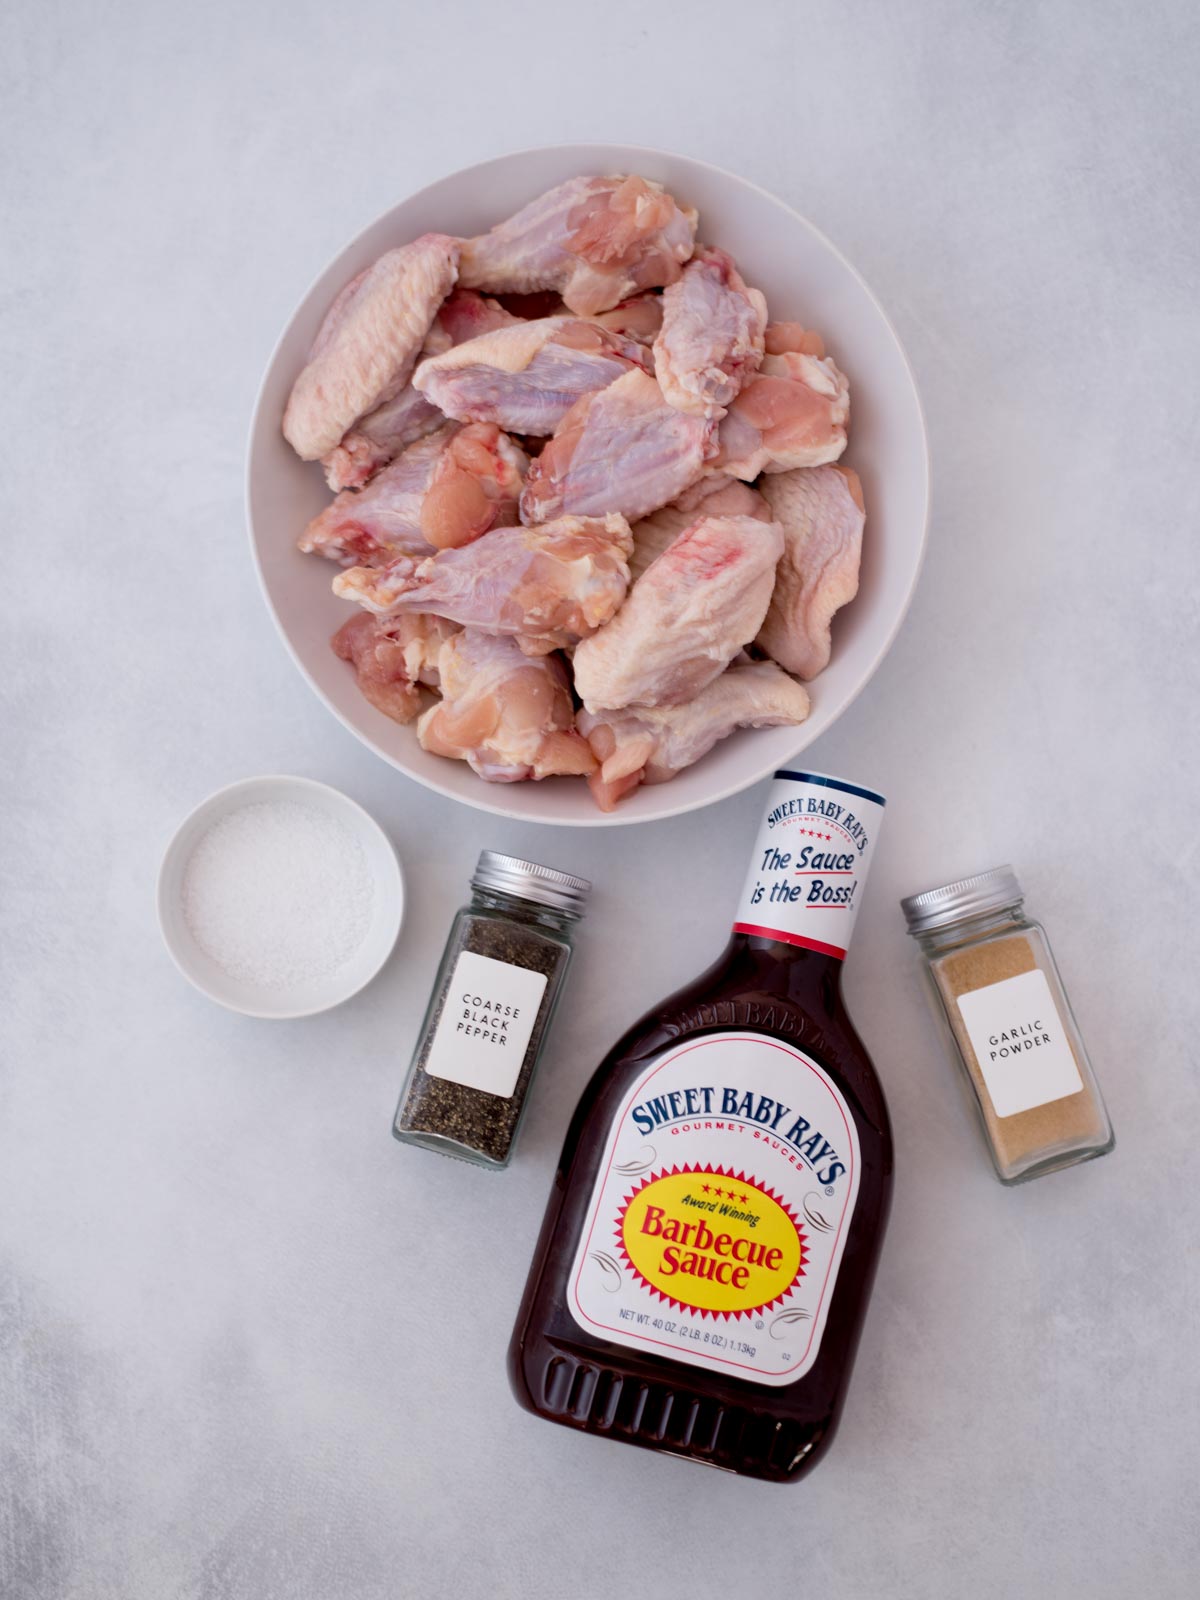 Ingredients shown are used to prepare bbq chicken wings in the crockpot.